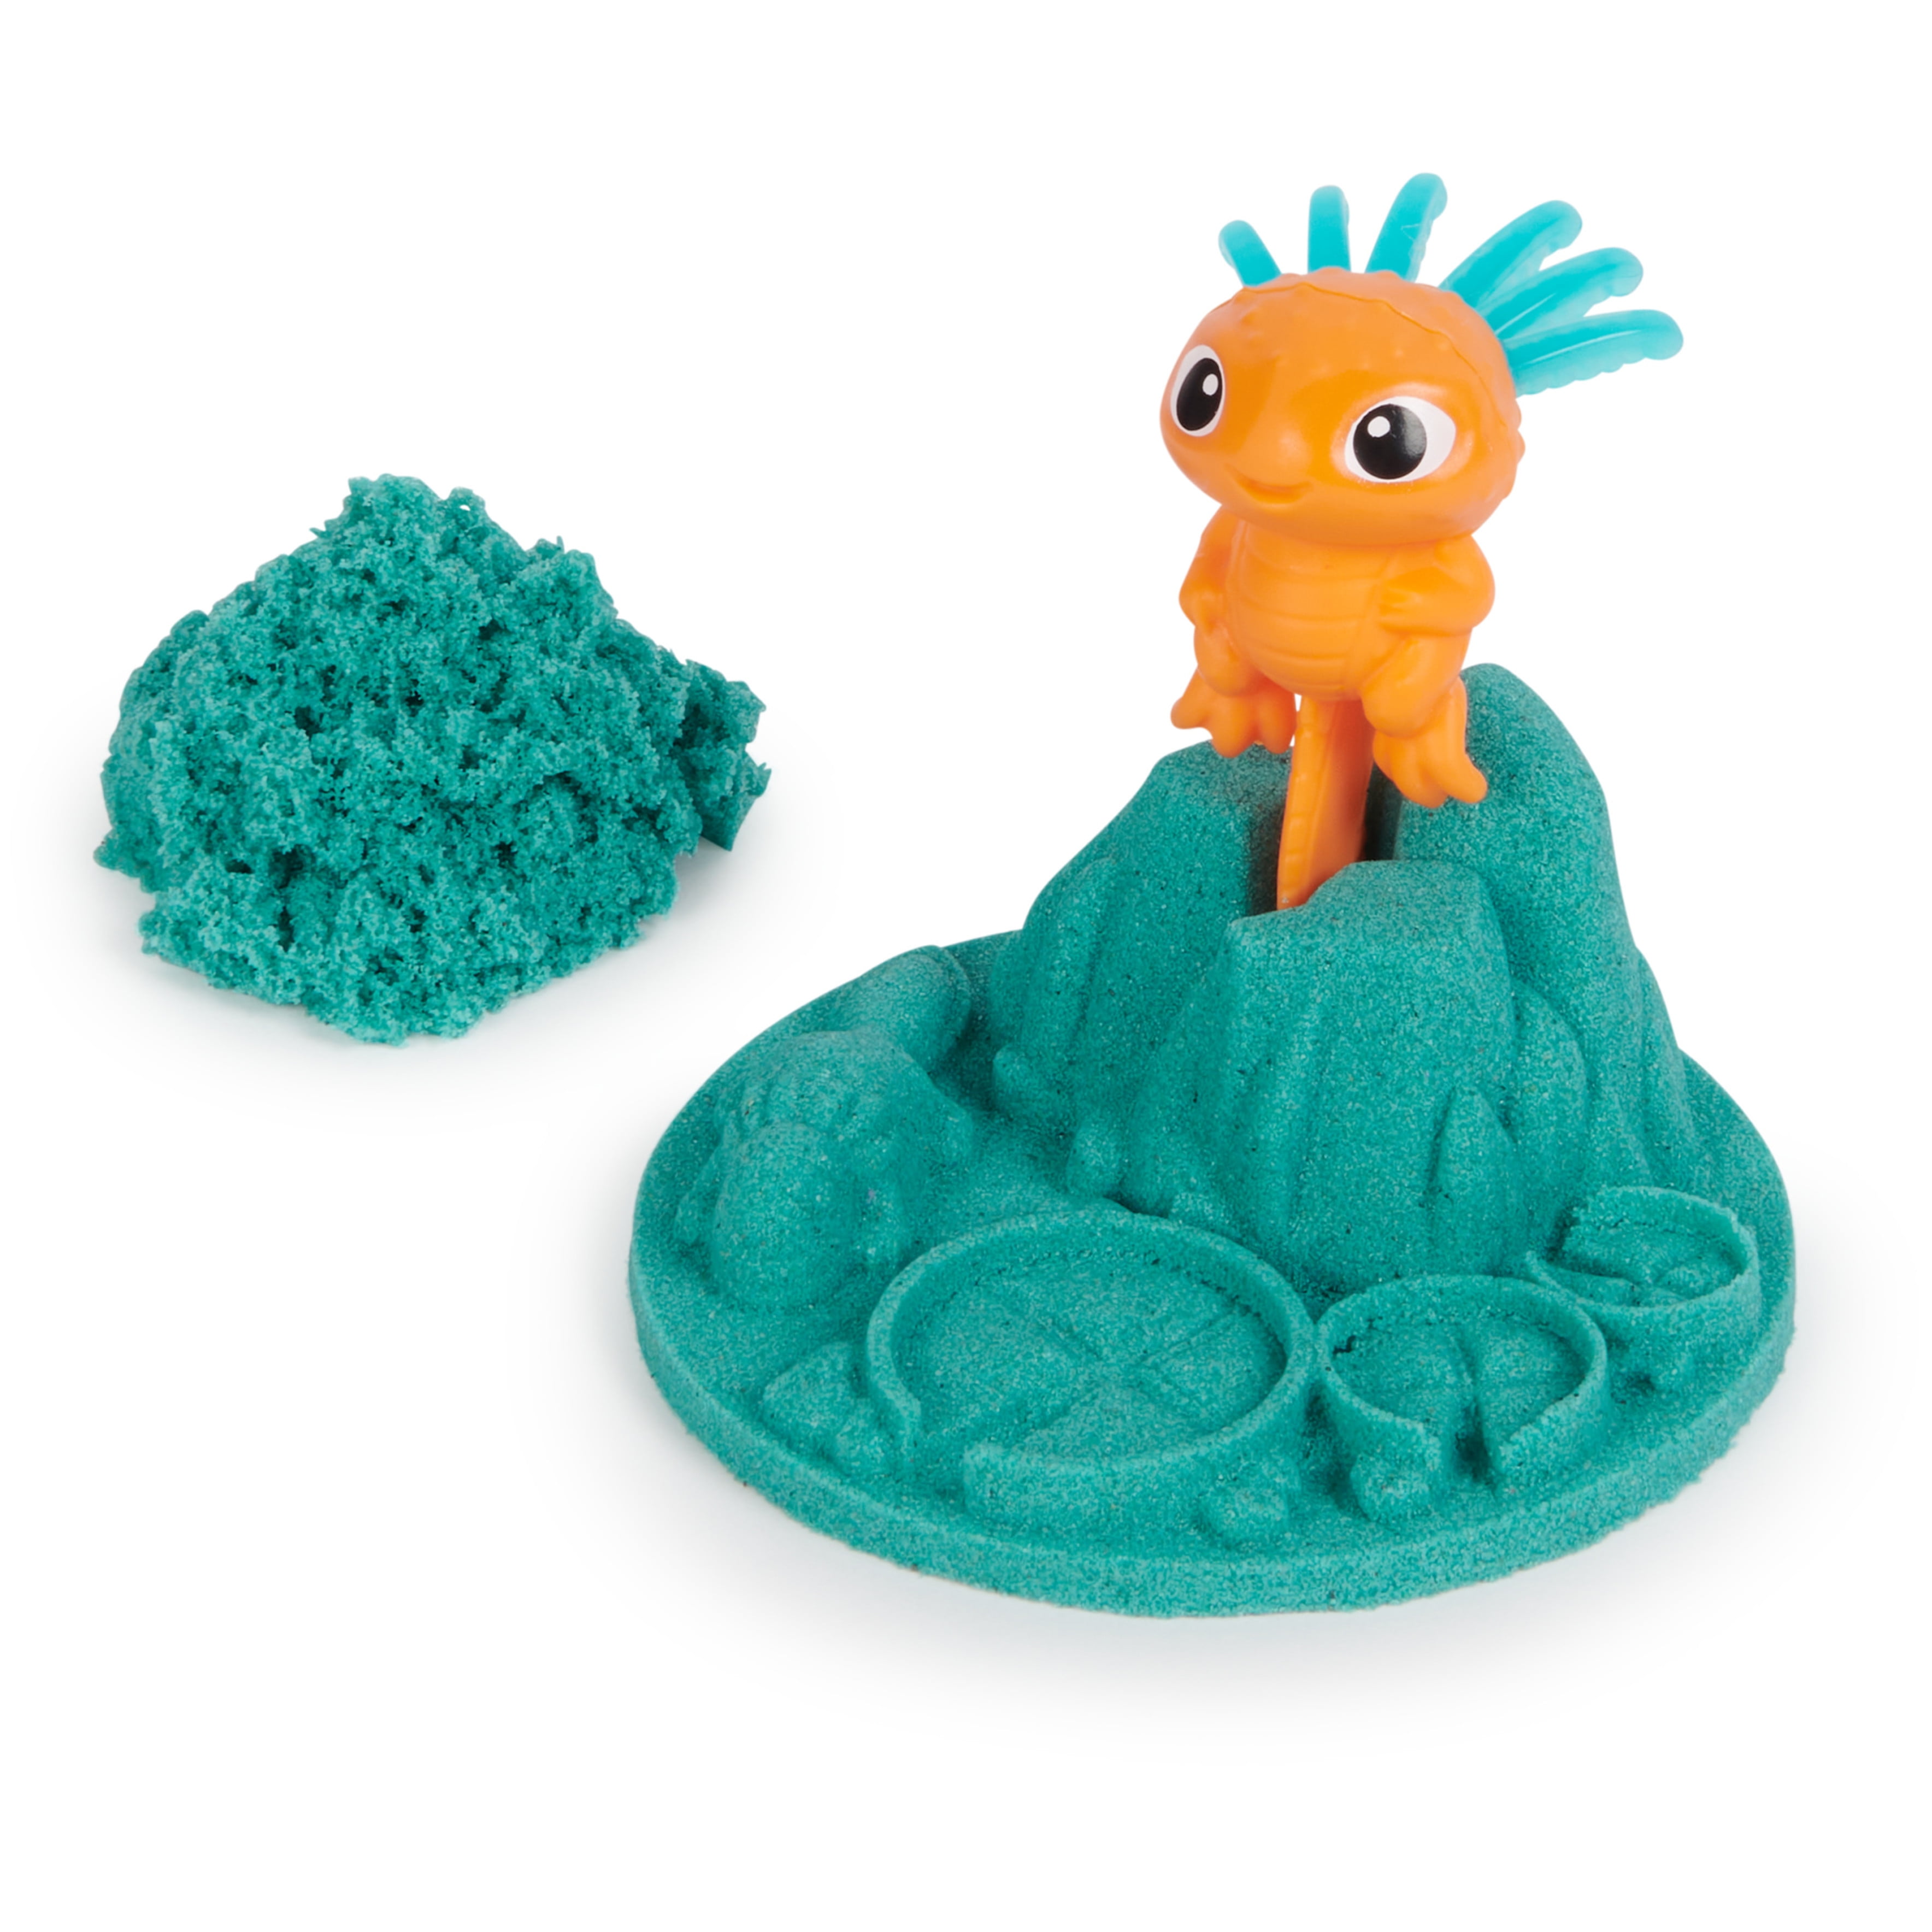 Kinetic Sand is Magical + Their Newest Set is a Lifesaver!